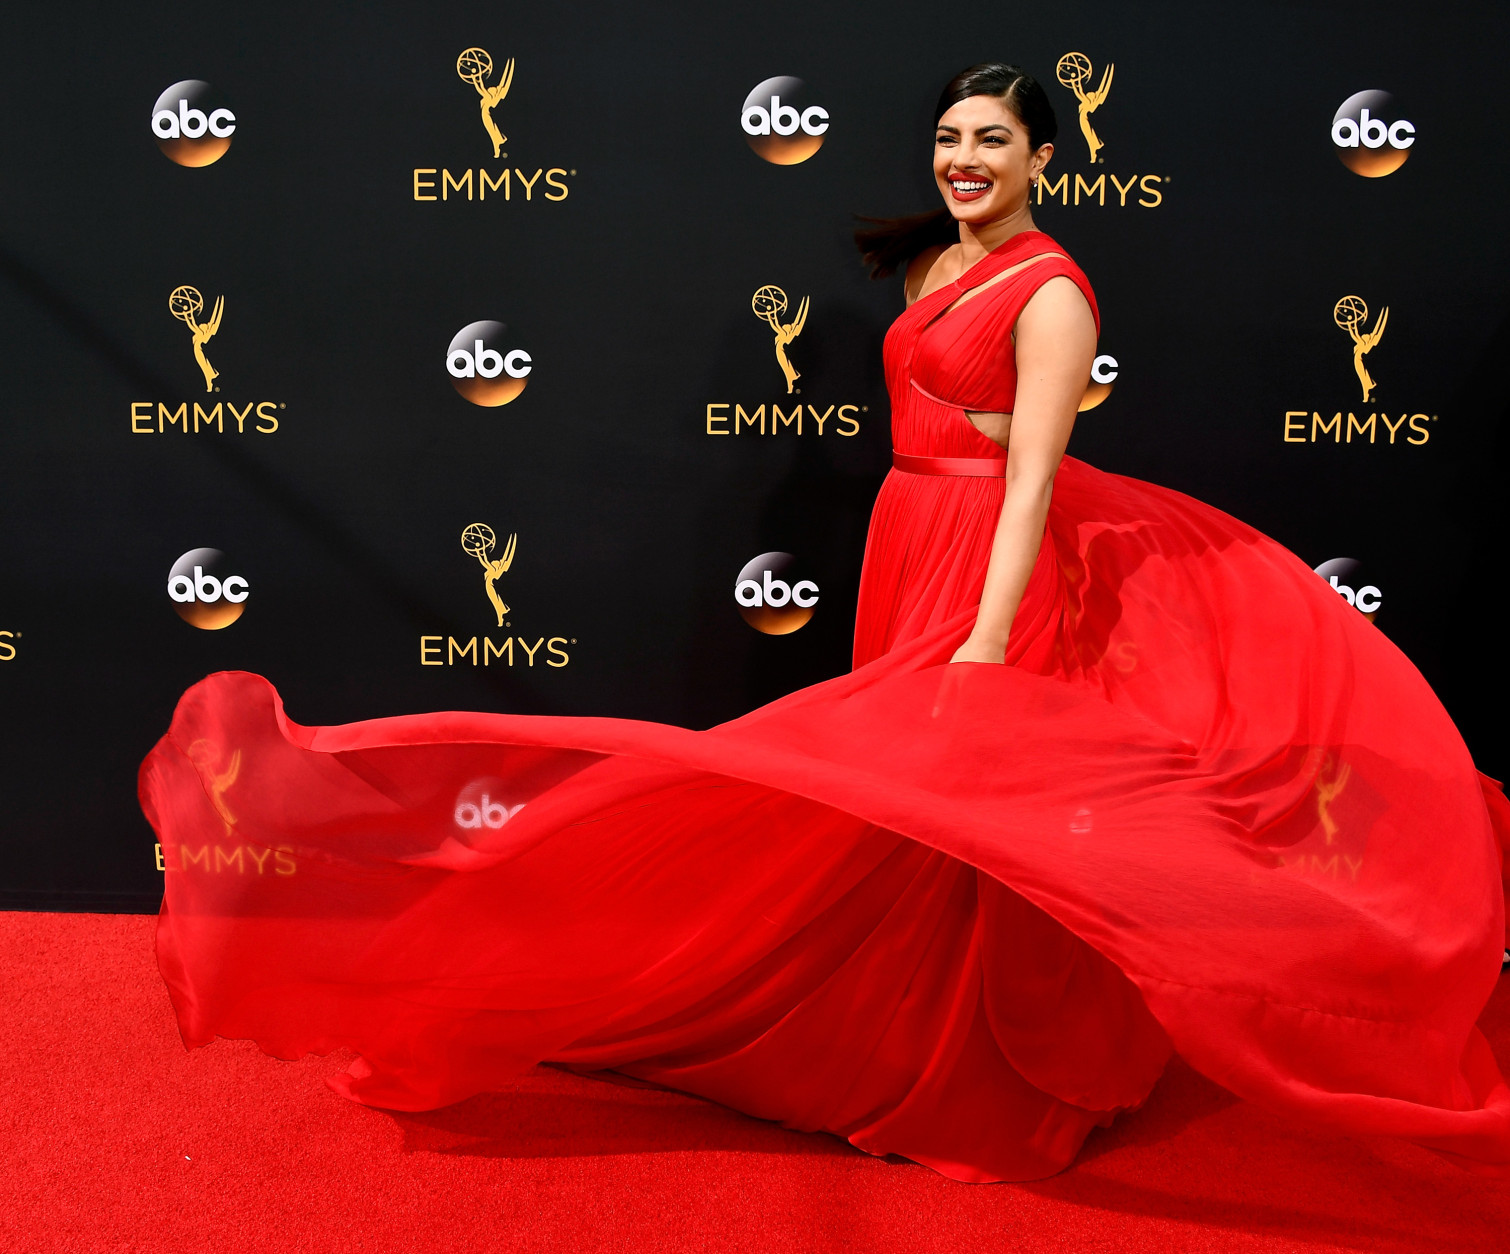 LOS ANGELES, CA - SEPTEMBER 18:  Actres Priyanka Chopra attends the 68th Annual Primetime Emmy Awards at Microsoft Theater on September 18, 2016 in Los Angeles, California.  (Photo by Frazer Harrison/Getty Images)